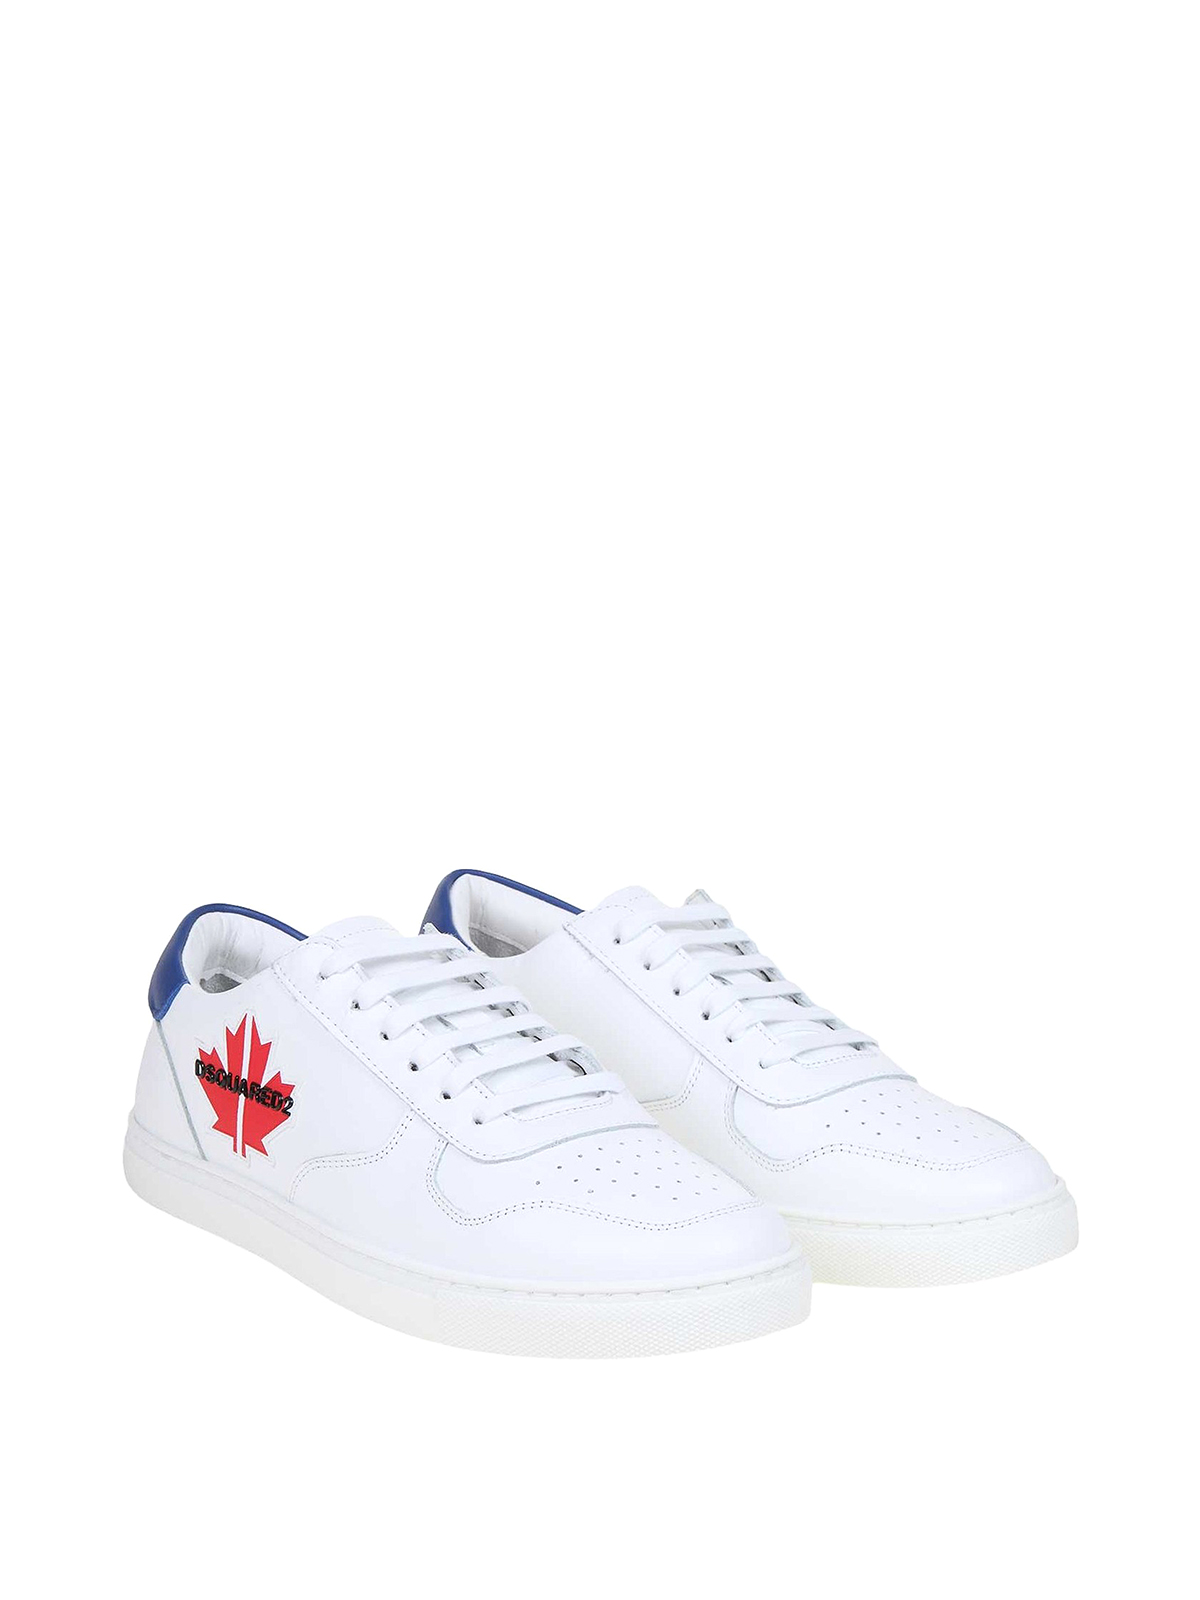 dsquared2 maple sneakers